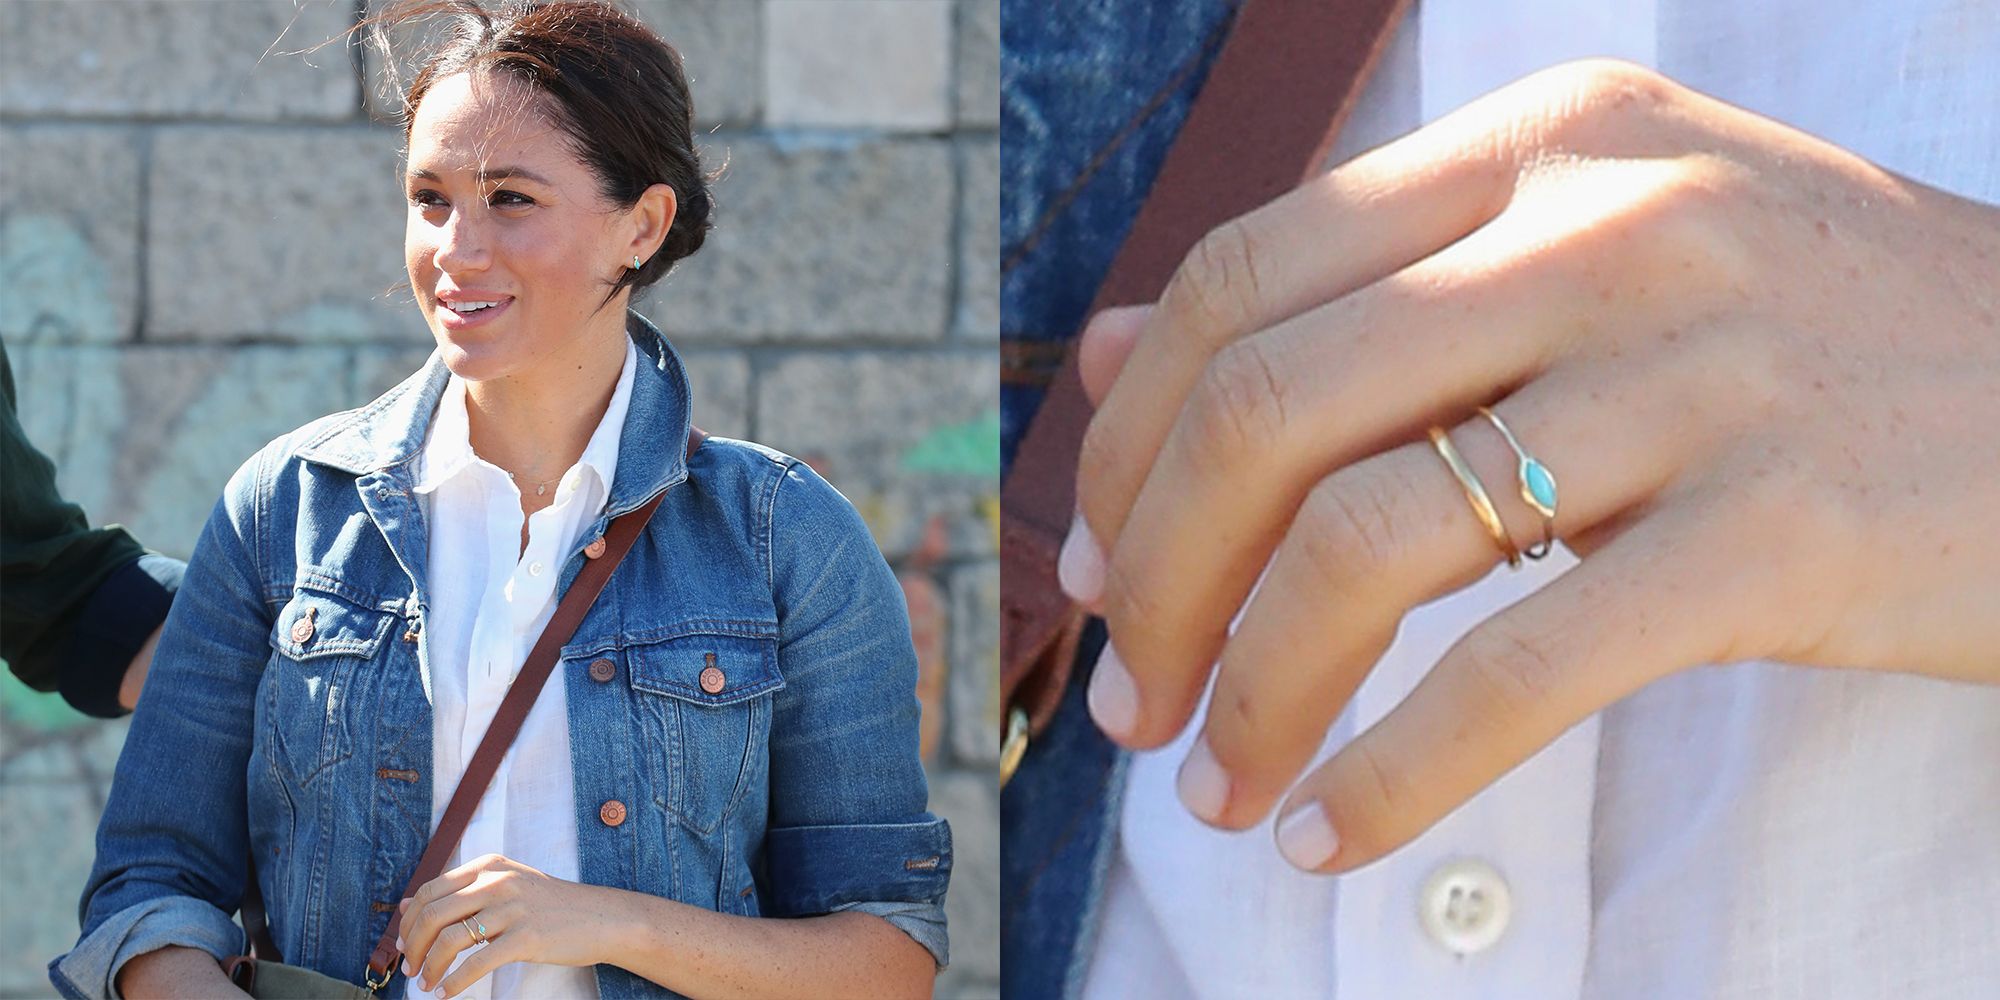 Our Top 5 Wedding Ring Stacks Right Now